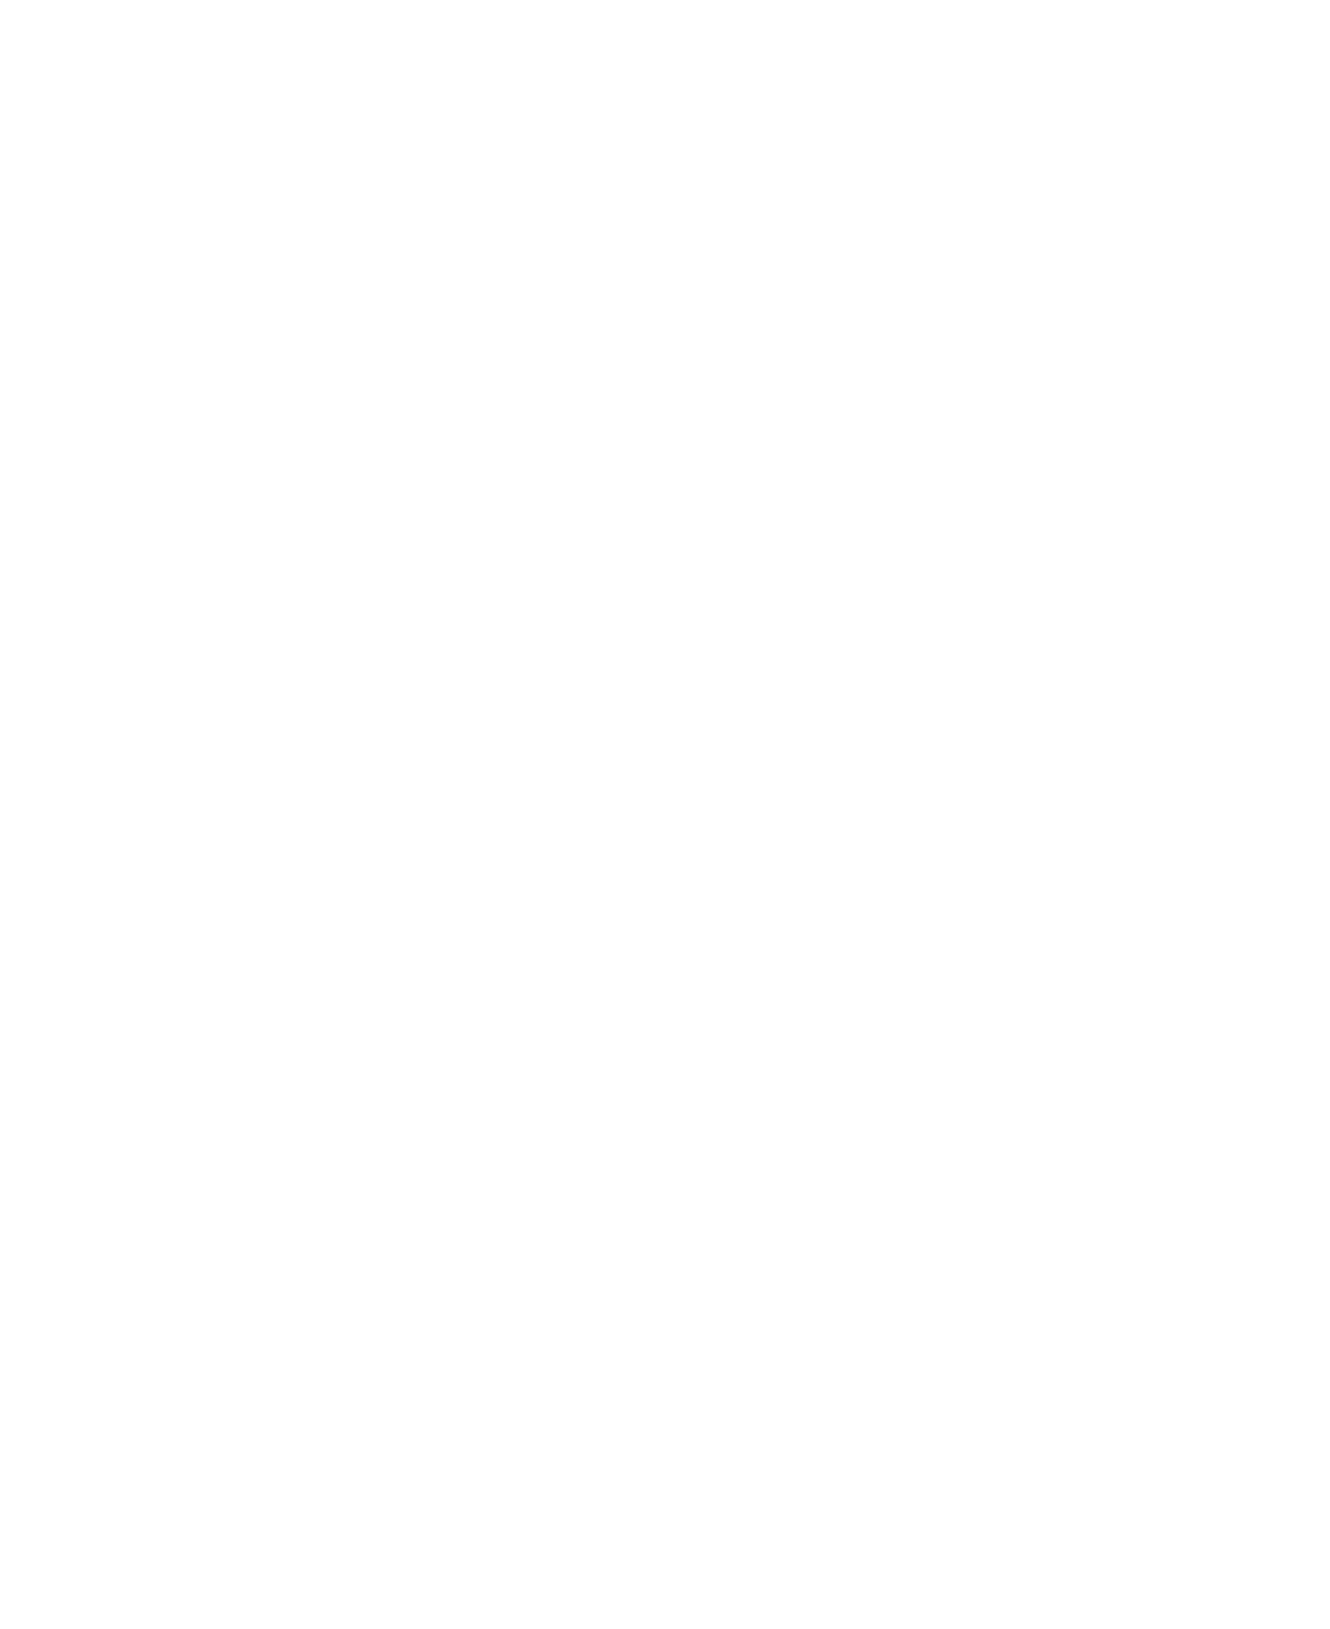 Welcome to the extraordinary world of Jess von I